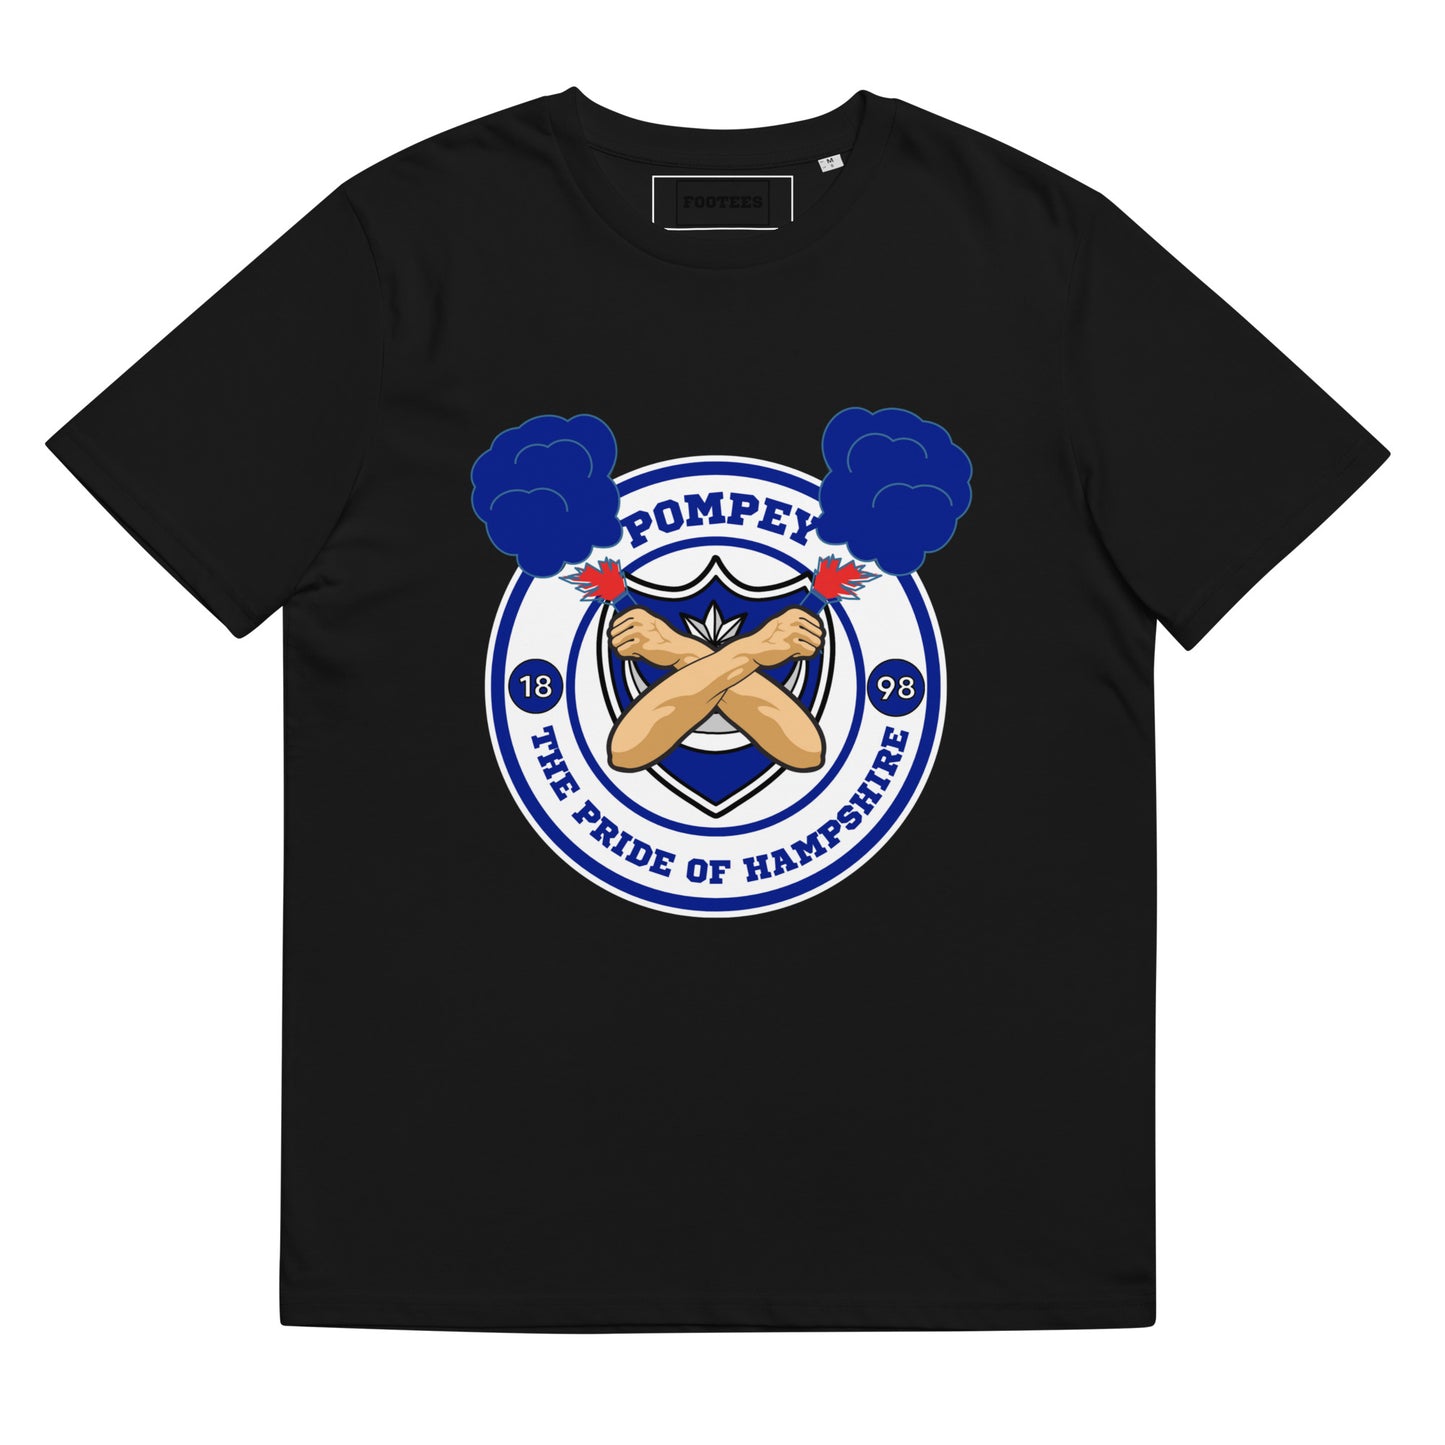 The Pride of Hampshire PFC Tee